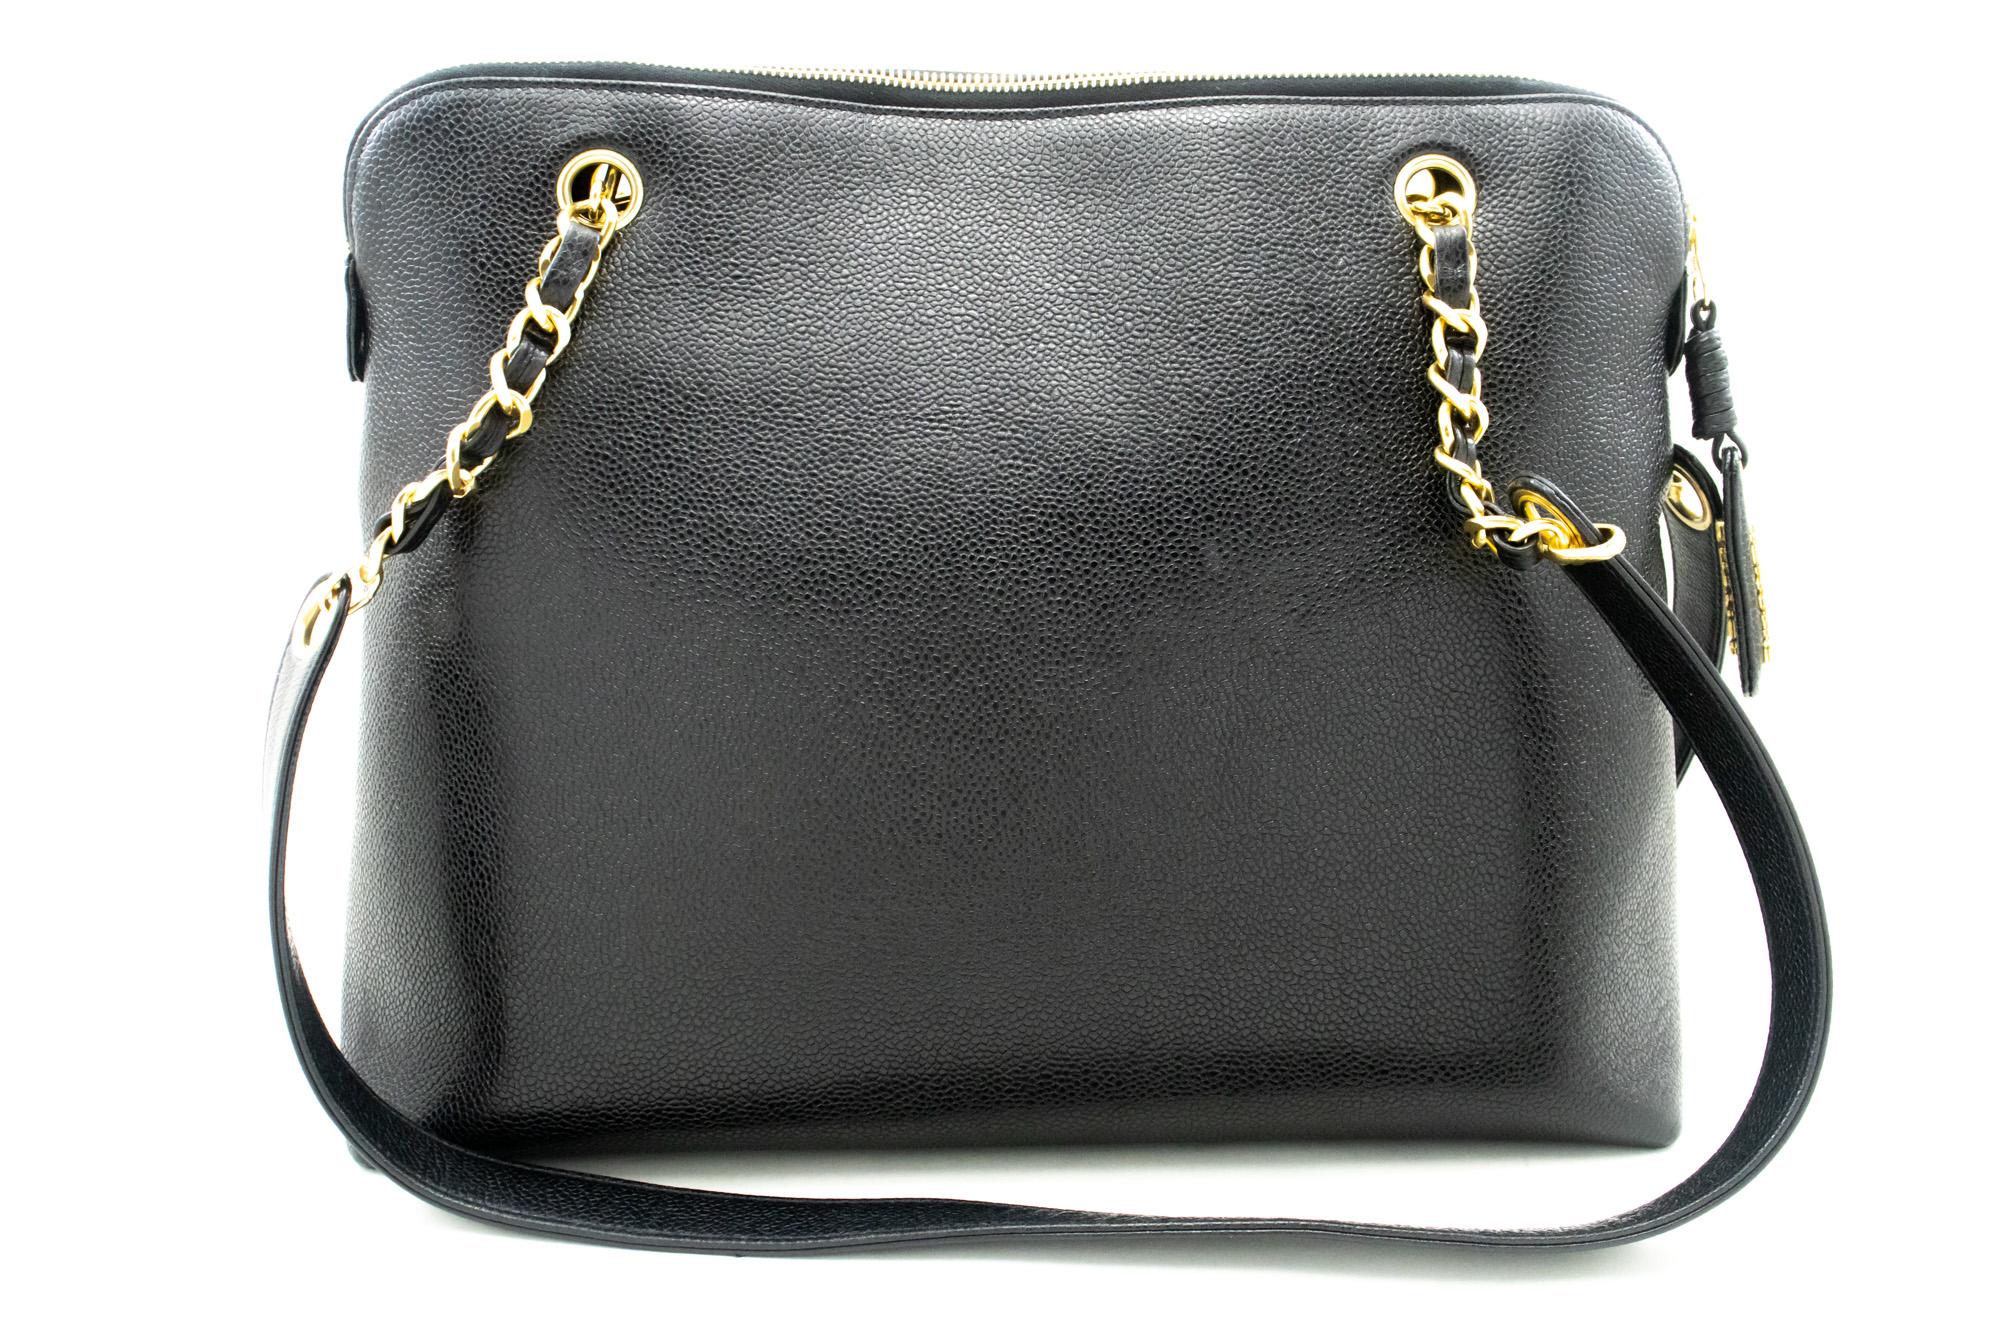 CHANEL Caviar Large Chain Shoulder Bag Leather Black Zip Goldper In Good Condition For Sale In Takamatsu-shi, JP